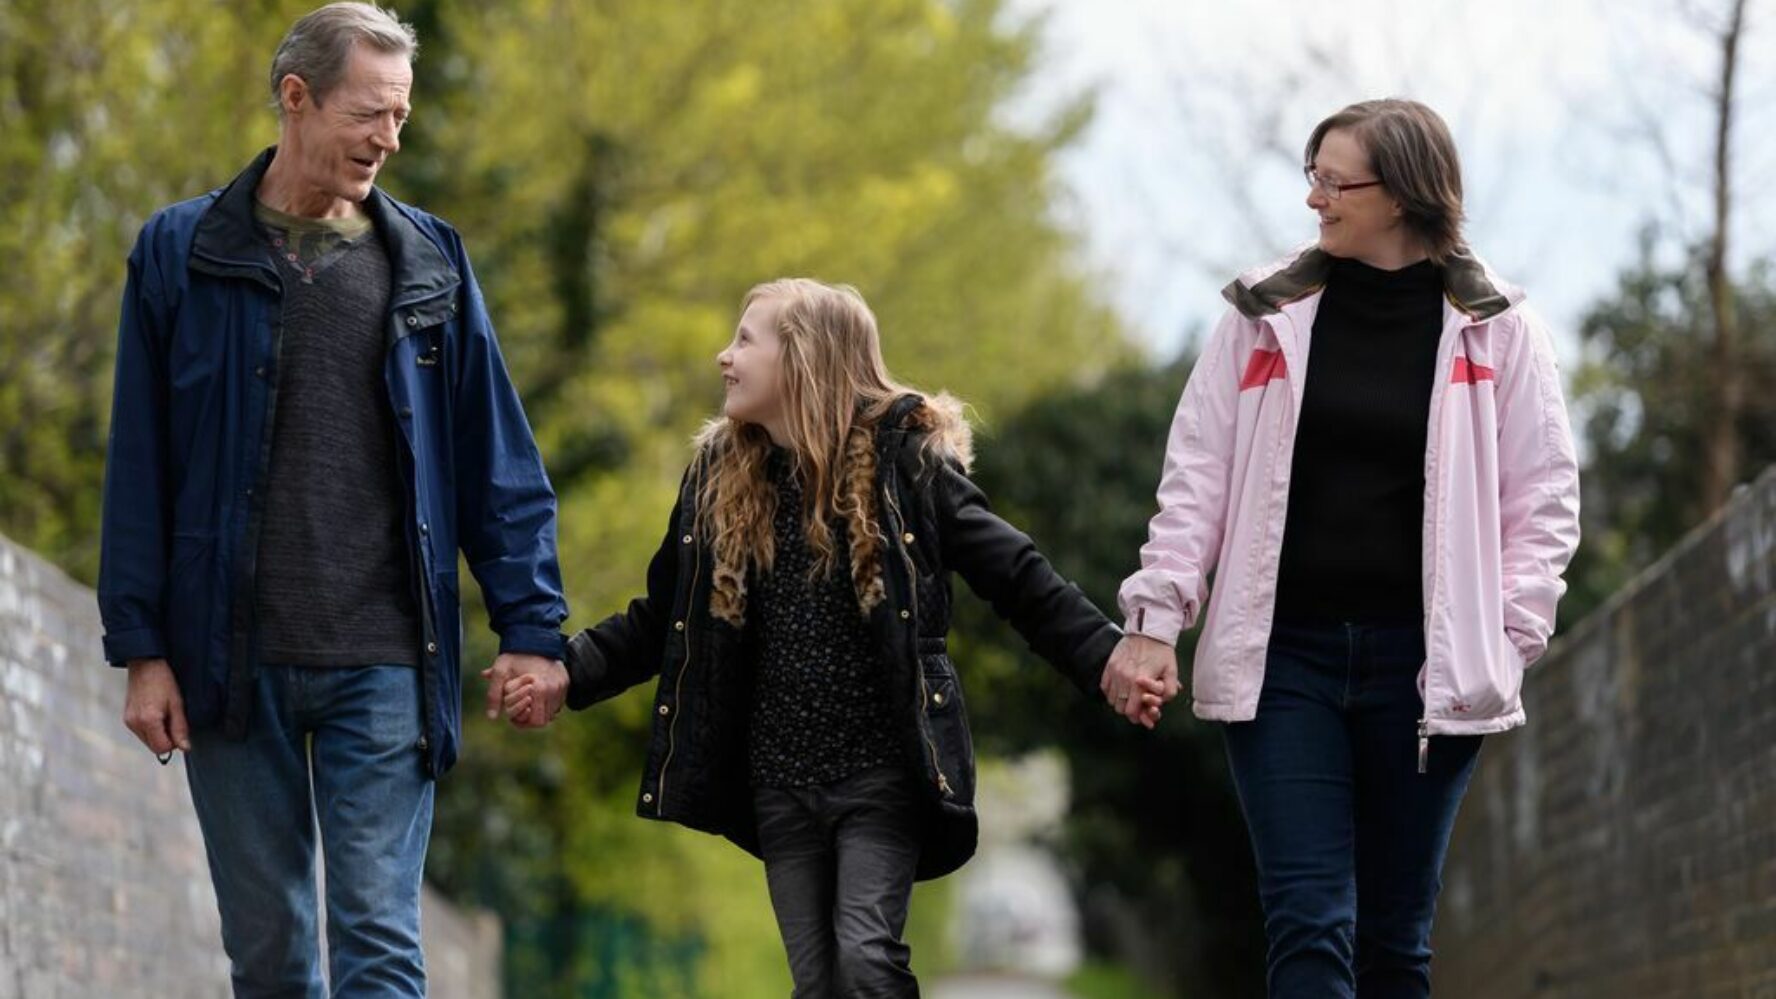 Male and female holding hands with young girl, walking and smiling at each other.